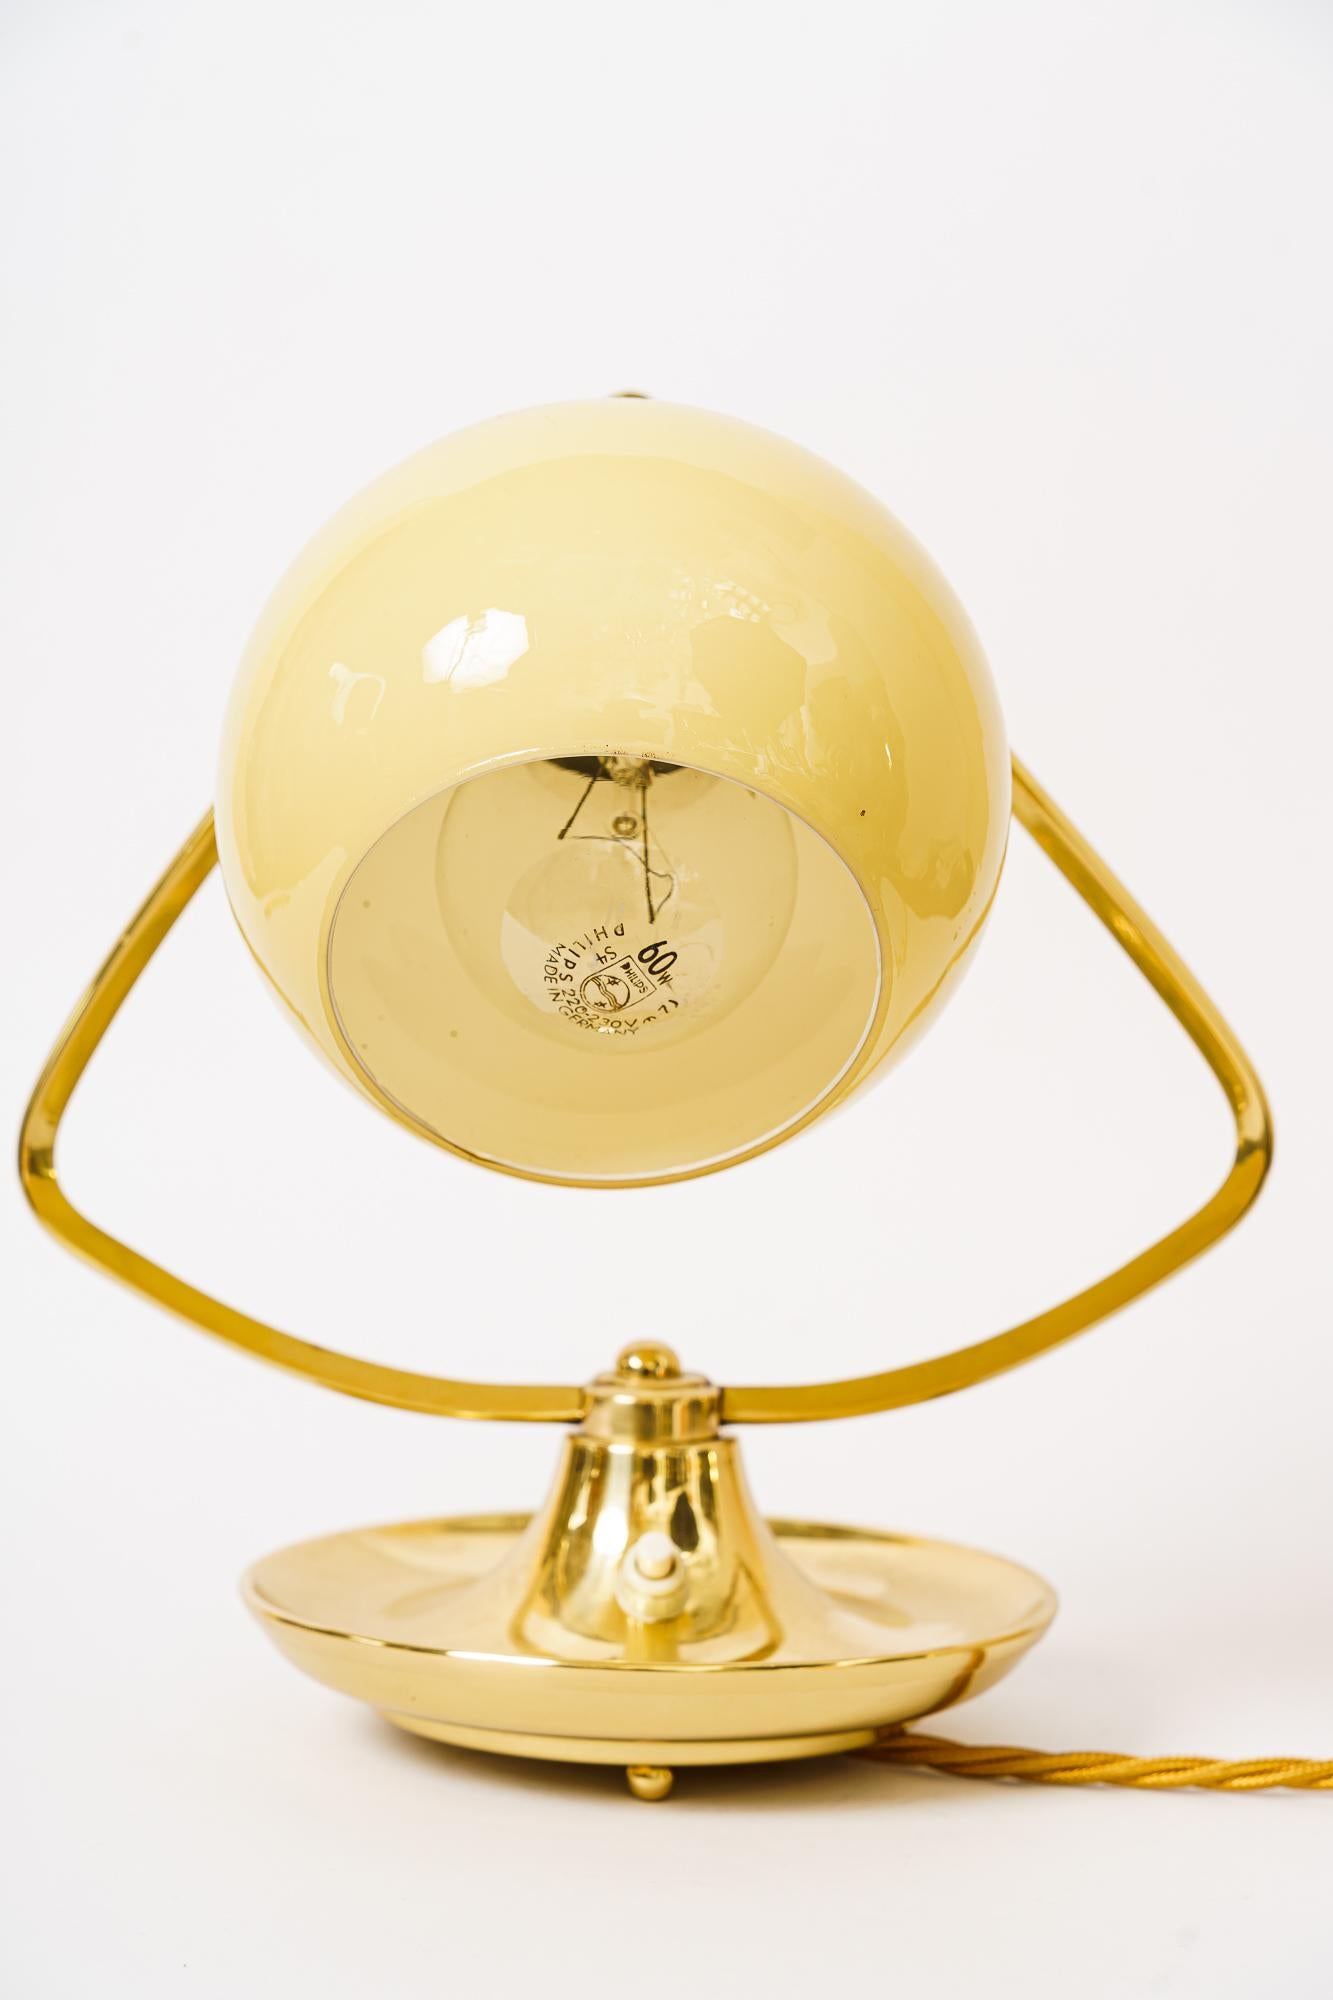 Art Deco table lamp with opal glass shade vienna, circa 1920s.
Brass polished and stove enameled.